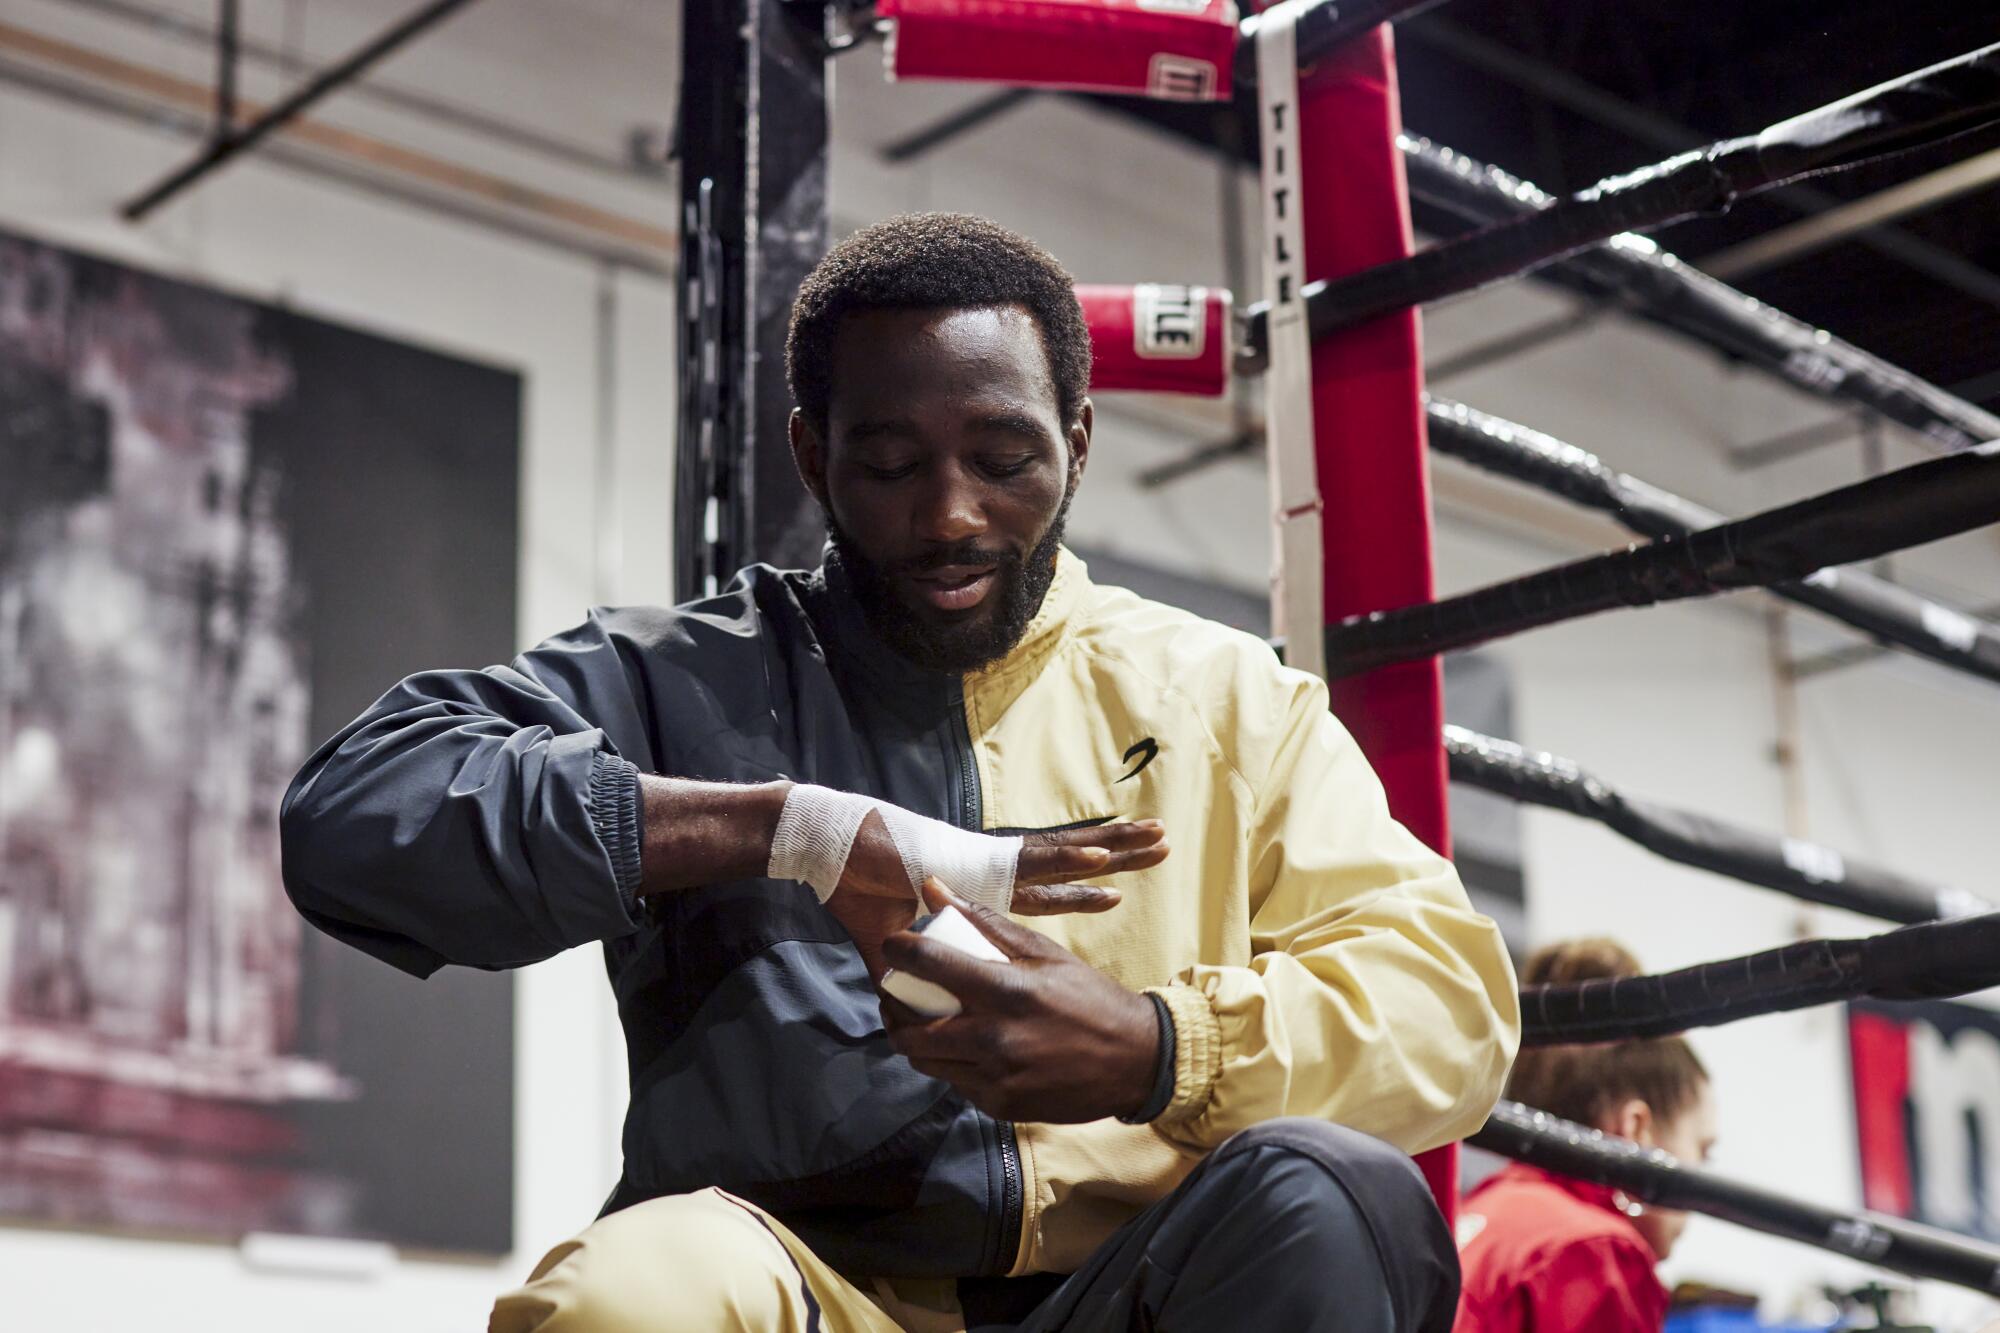 Terence 'Bud' Crawford wraps tape around his hands while standing outside a ring, getting ready to train